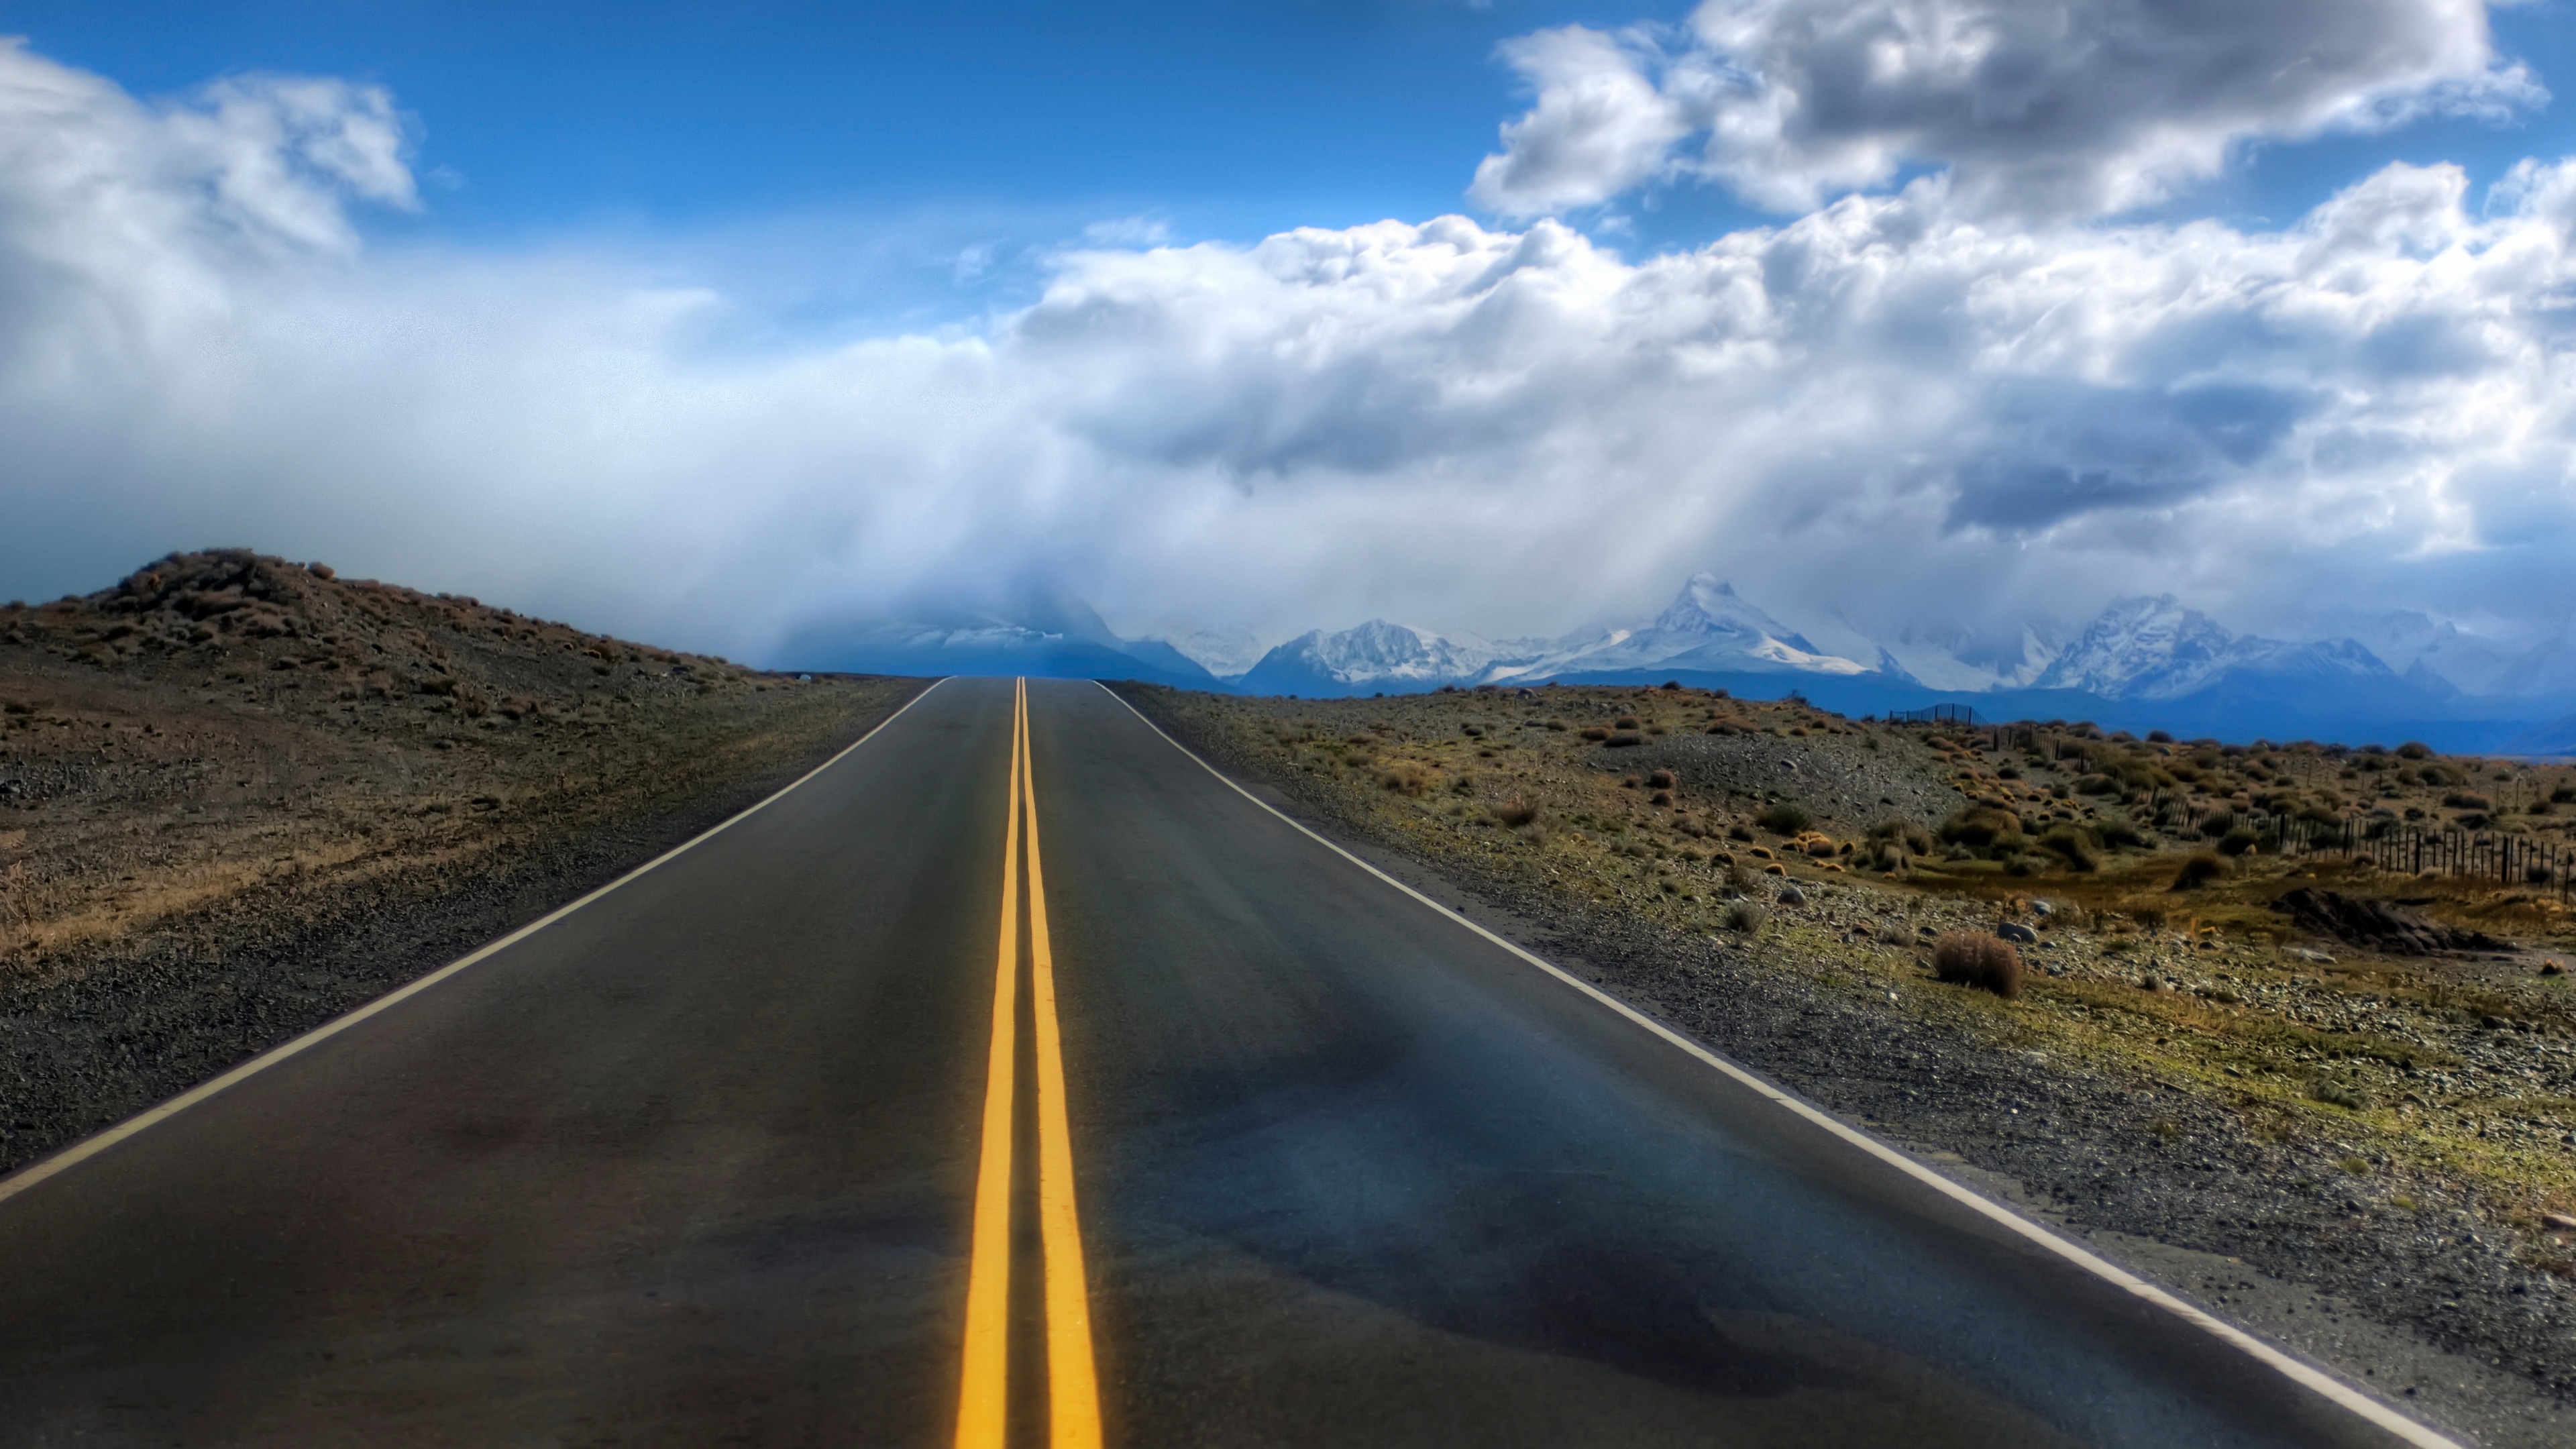 General 3840x2160 Trey Ratcliff photography landscape road mountain chain Andes  snow sky clouds